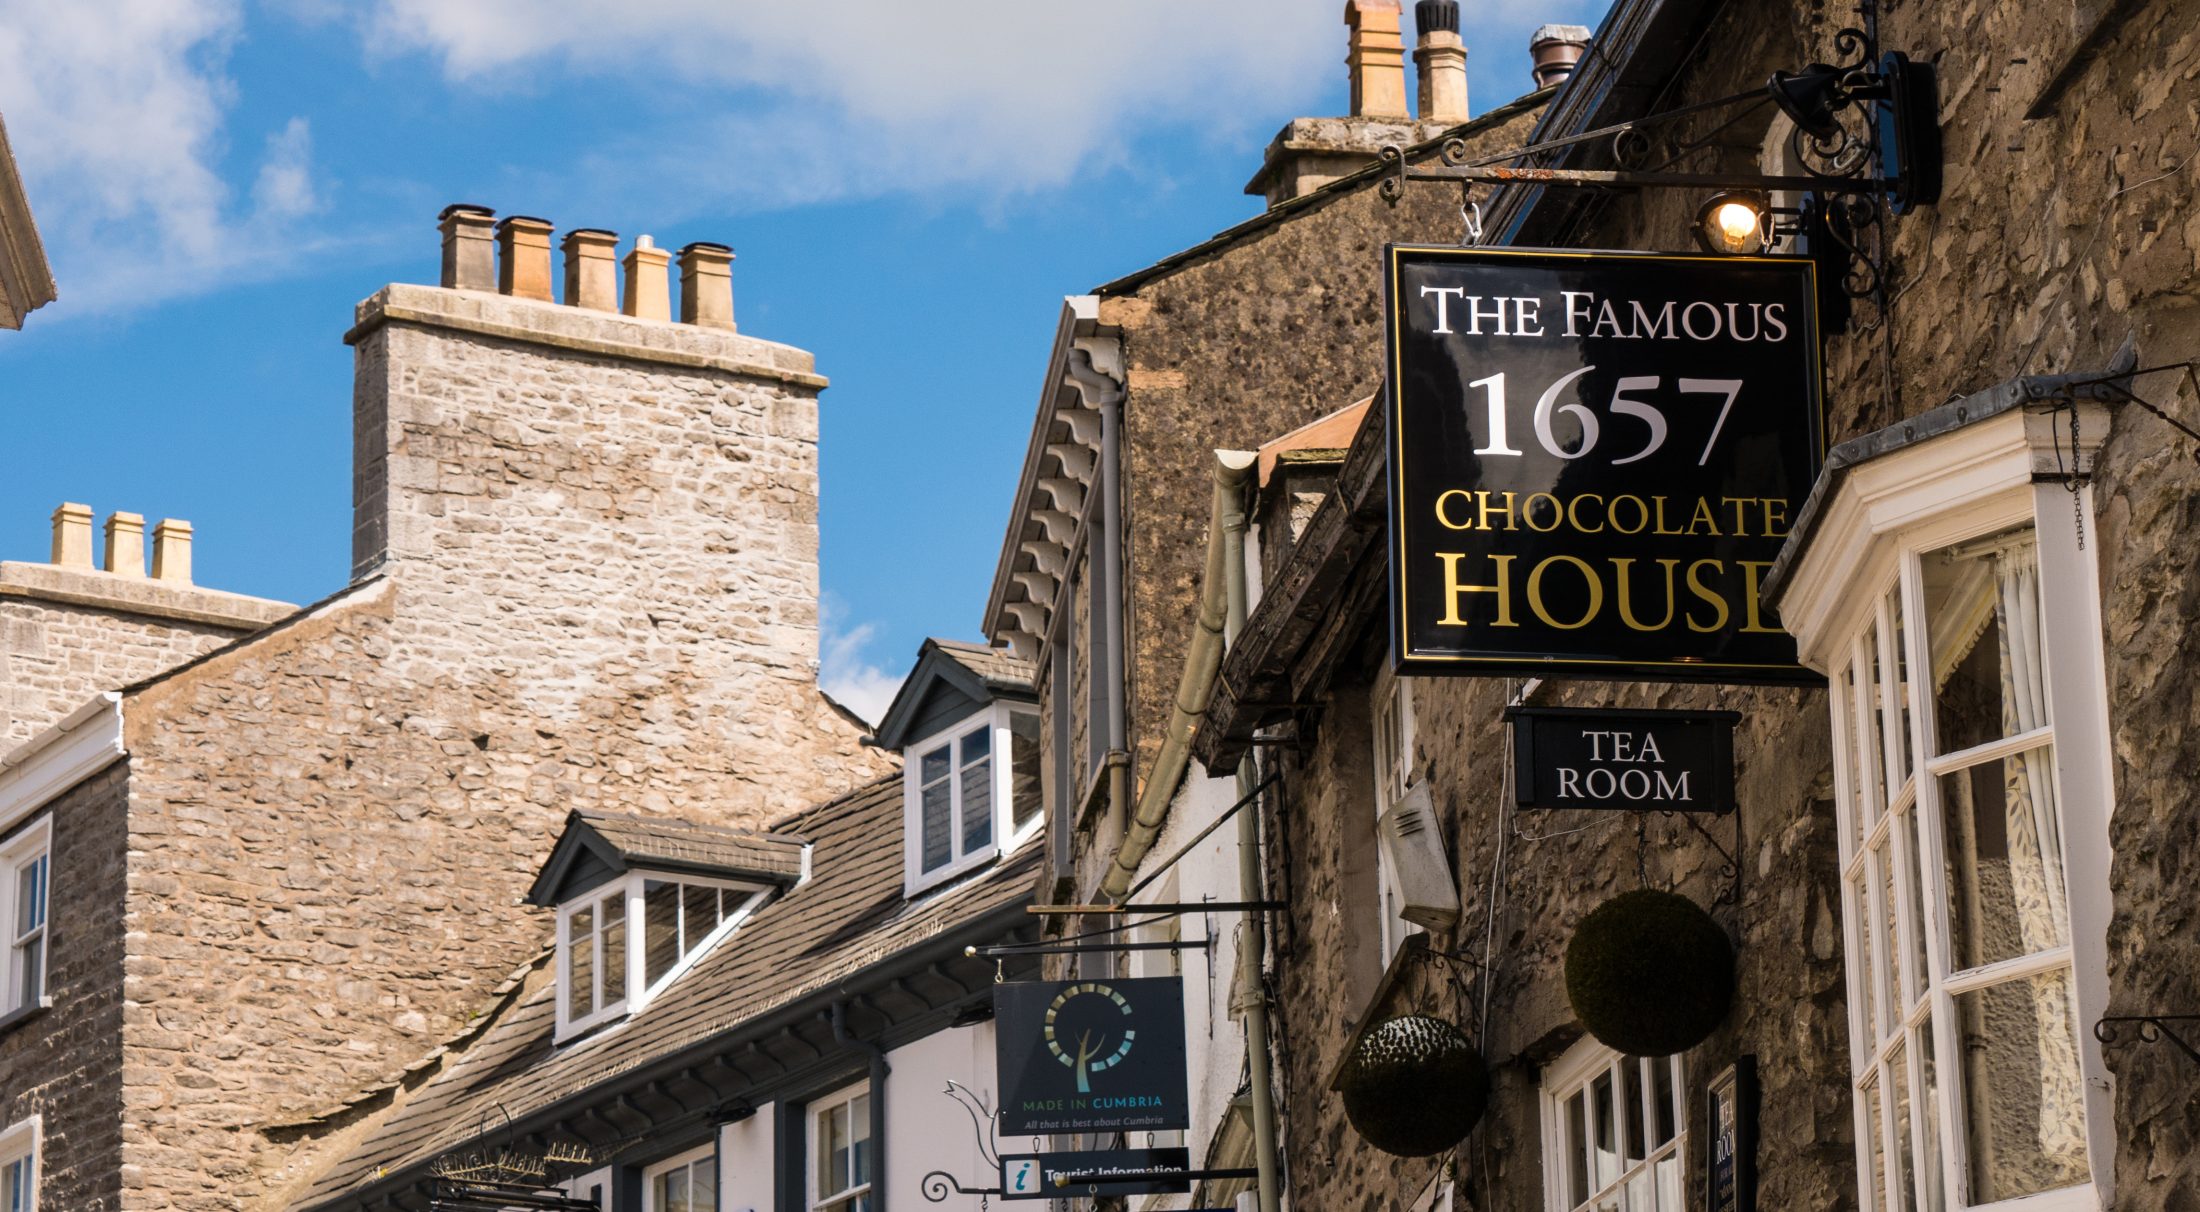 Heritage - 1657 Chocolate House dates from the 1630s on the cobbled streets of Branthwaite Brow and